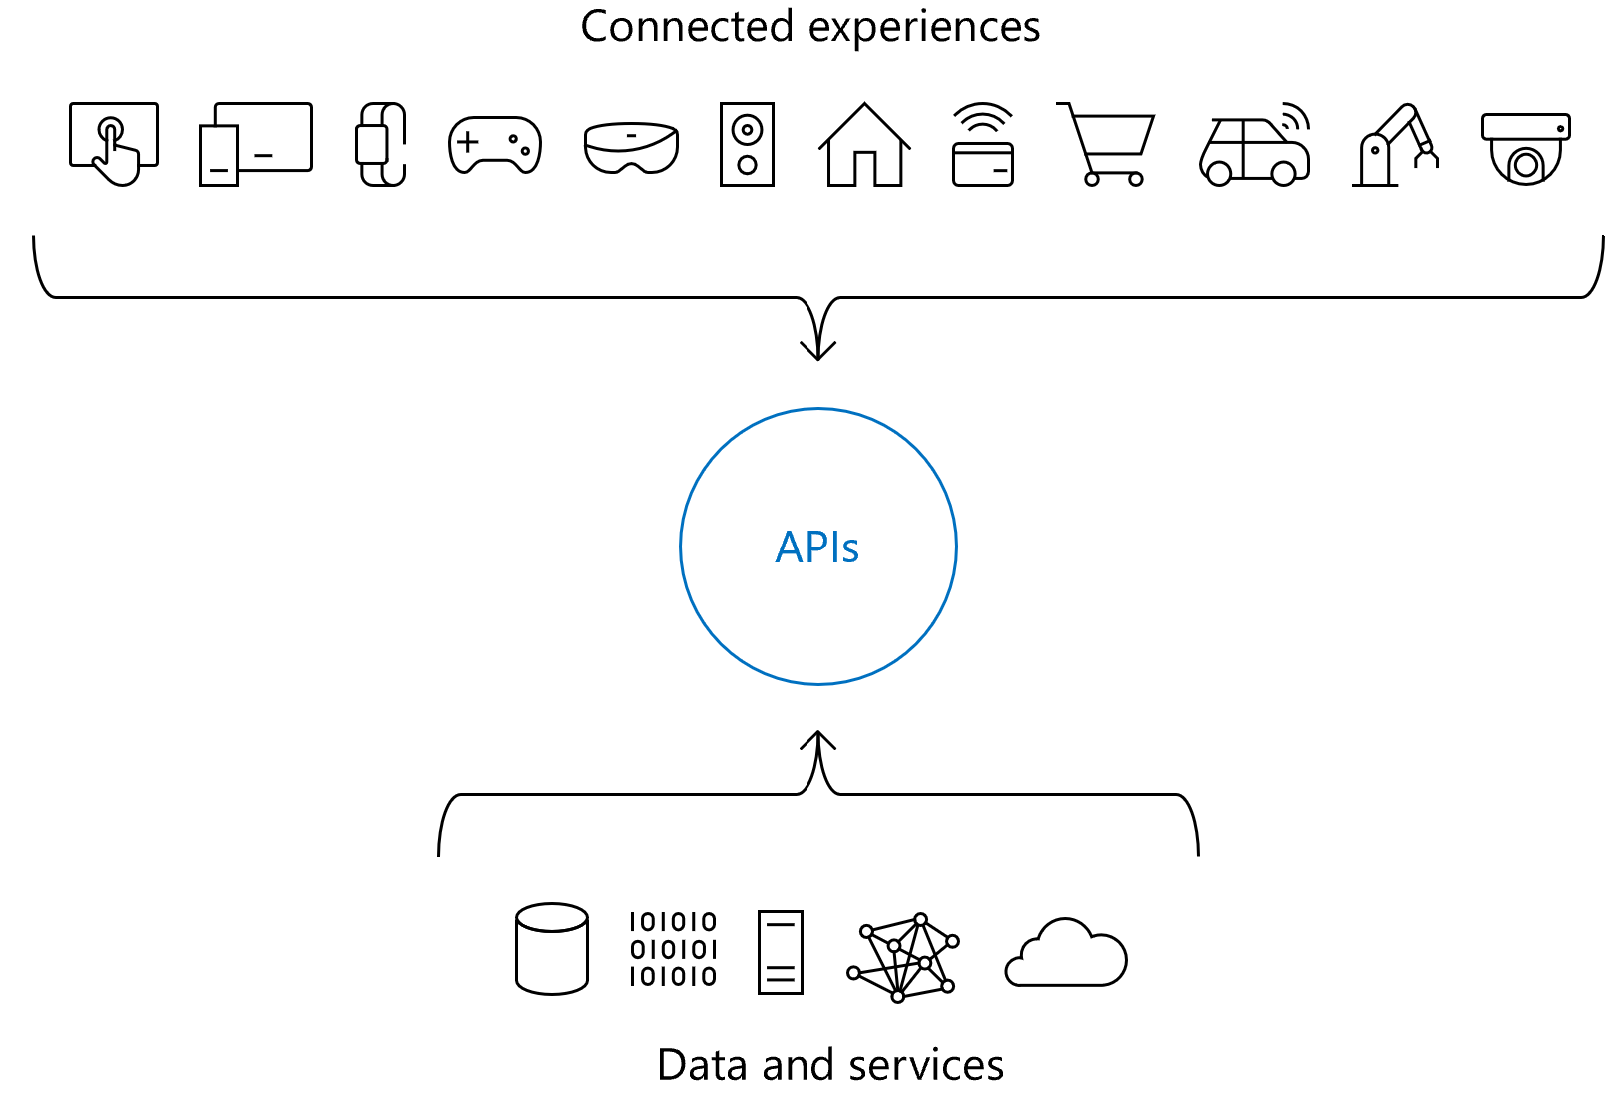 Diagram showing role of APIs in connected experiences.